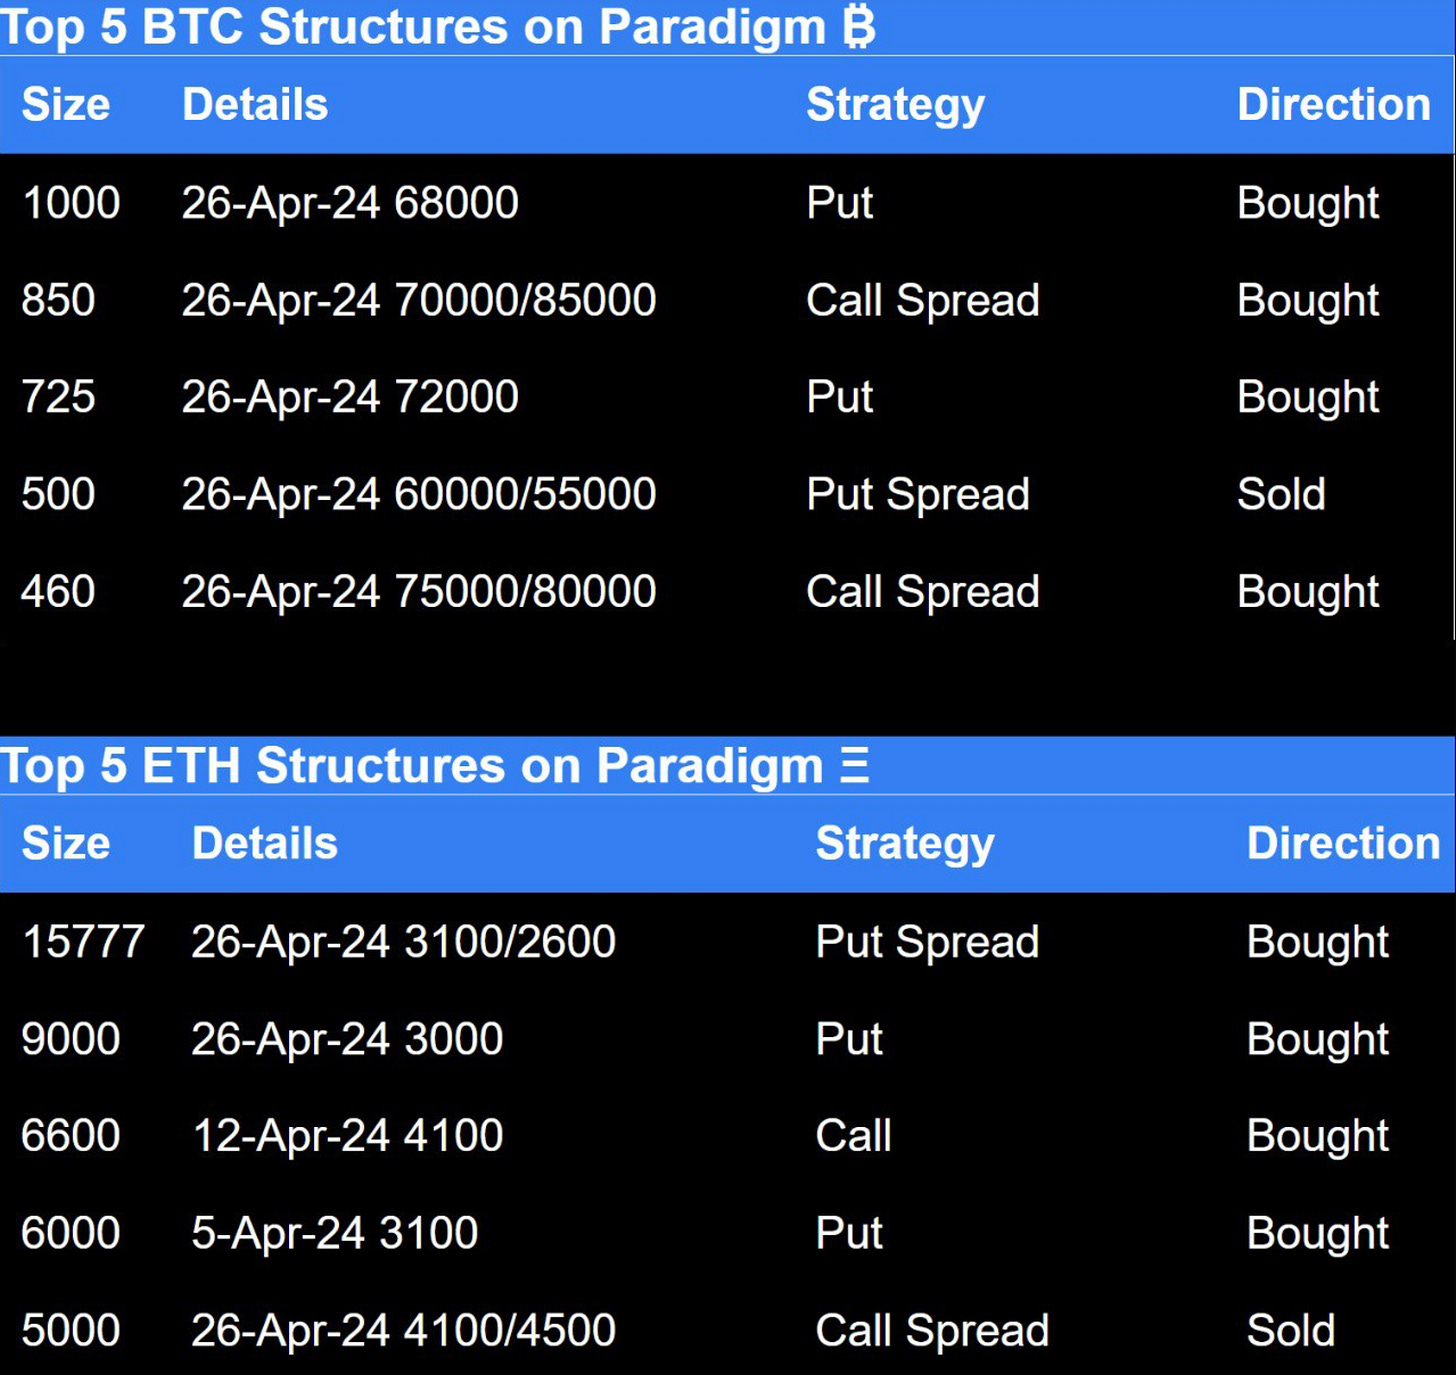 Crypto options institutional top 5 BTC structures and top 5 ETH structures on paradigm